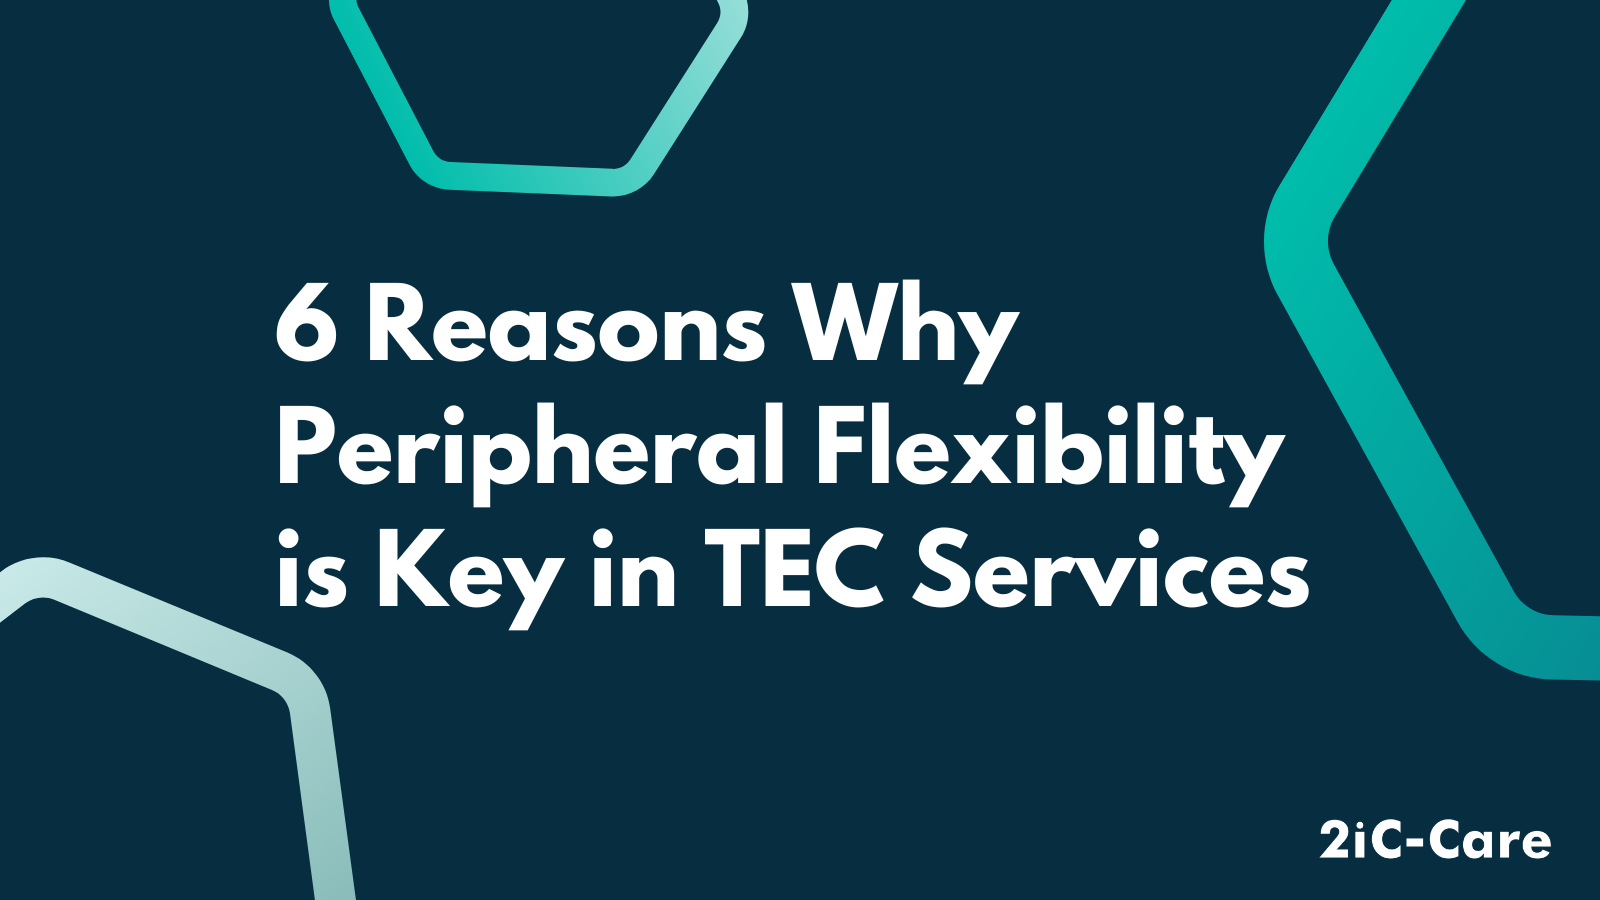 6 Reasons Why Peripheral Flexibility is Key in TEC Services